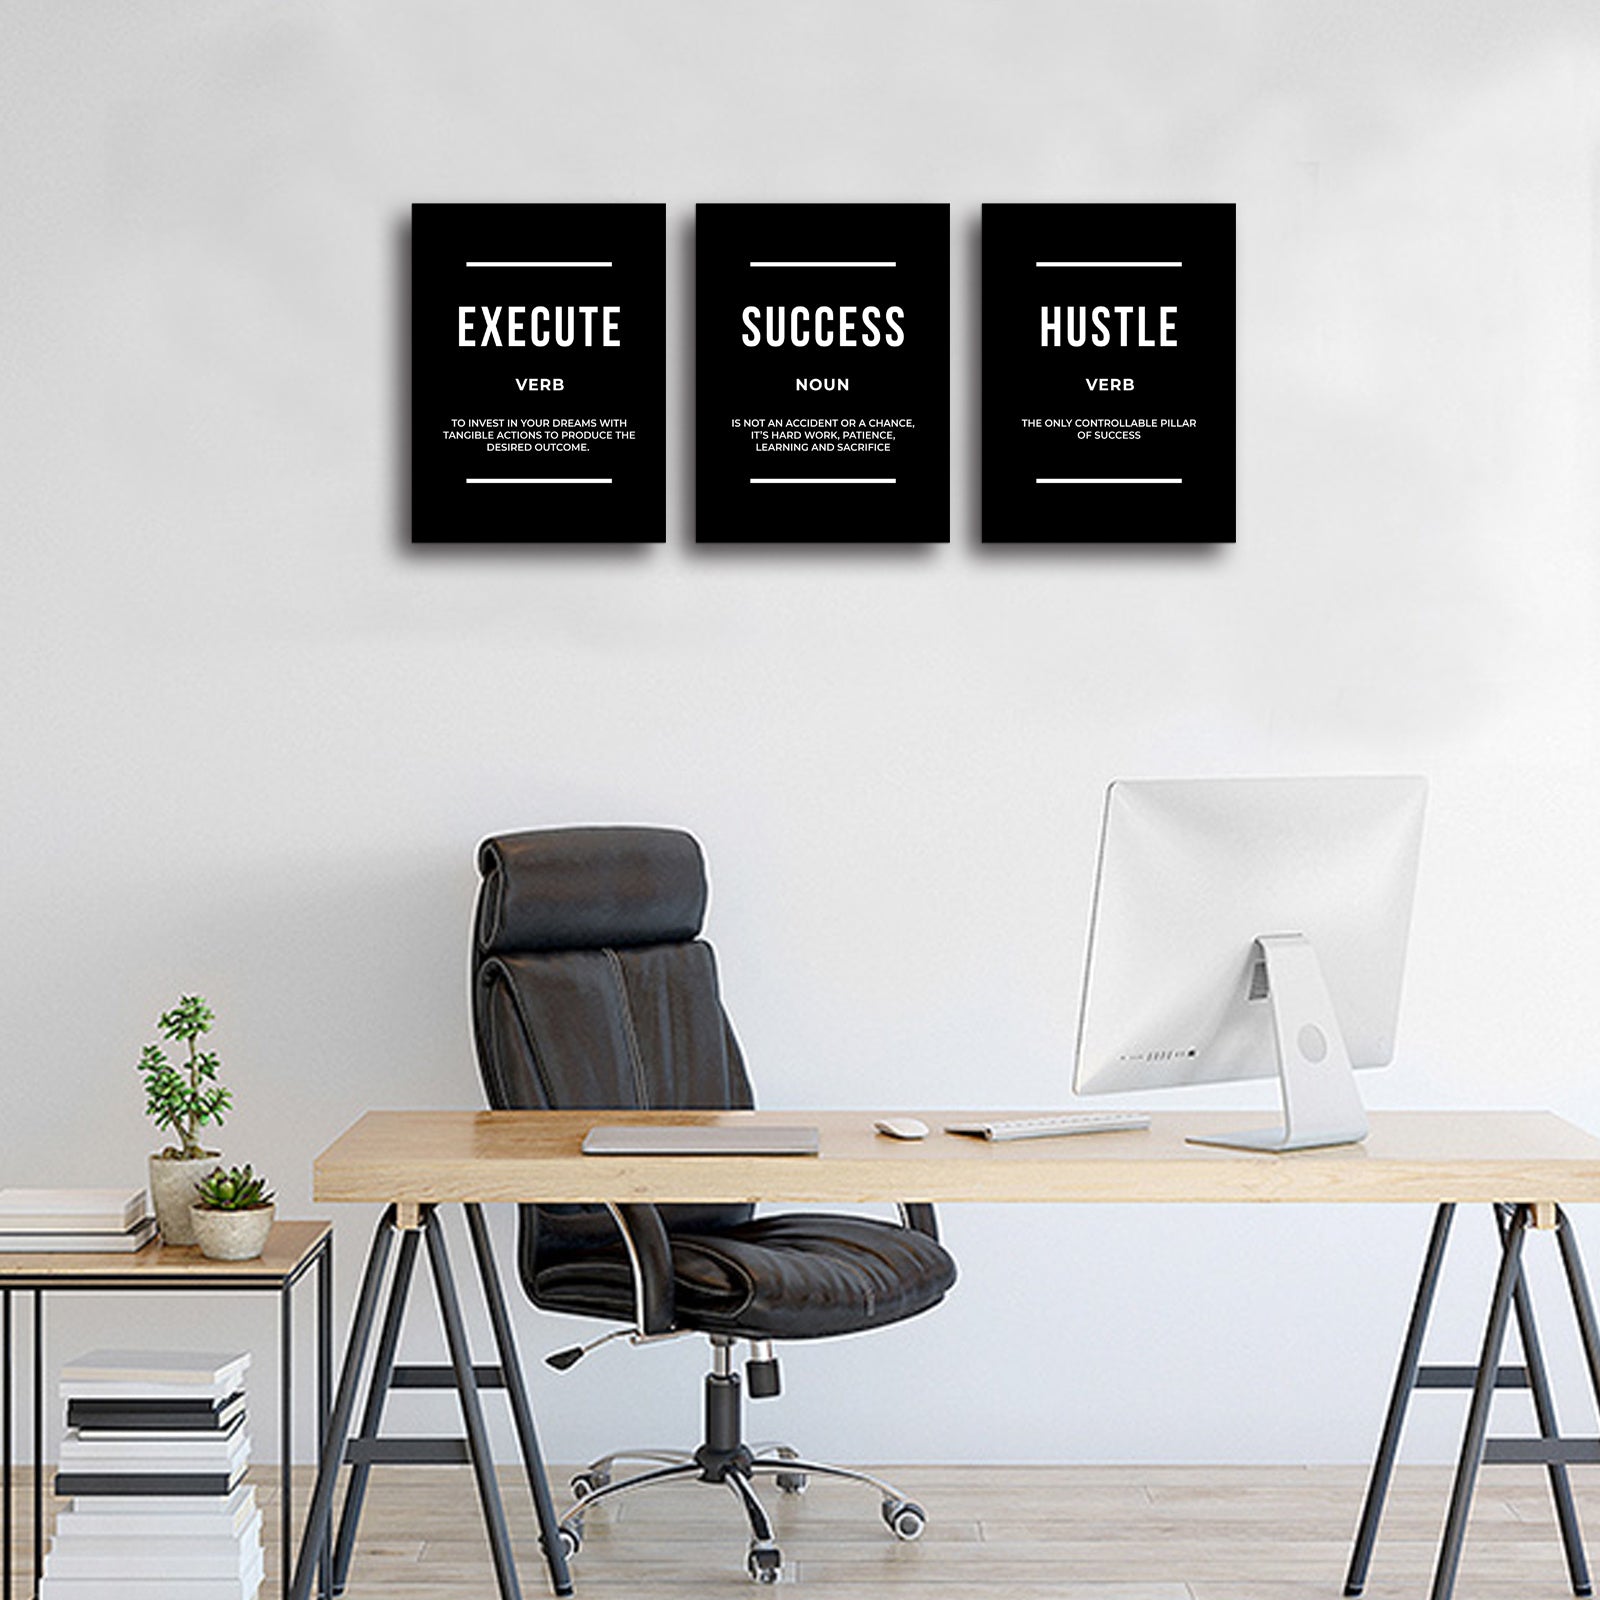 Motivational Wall Art Positive Quote Poster Canvas Painting Execute Success Hustle Inspirational Quotes Wall Art Office Wall Decor Pictures for Home Living Room Workplace,Ready to Hang